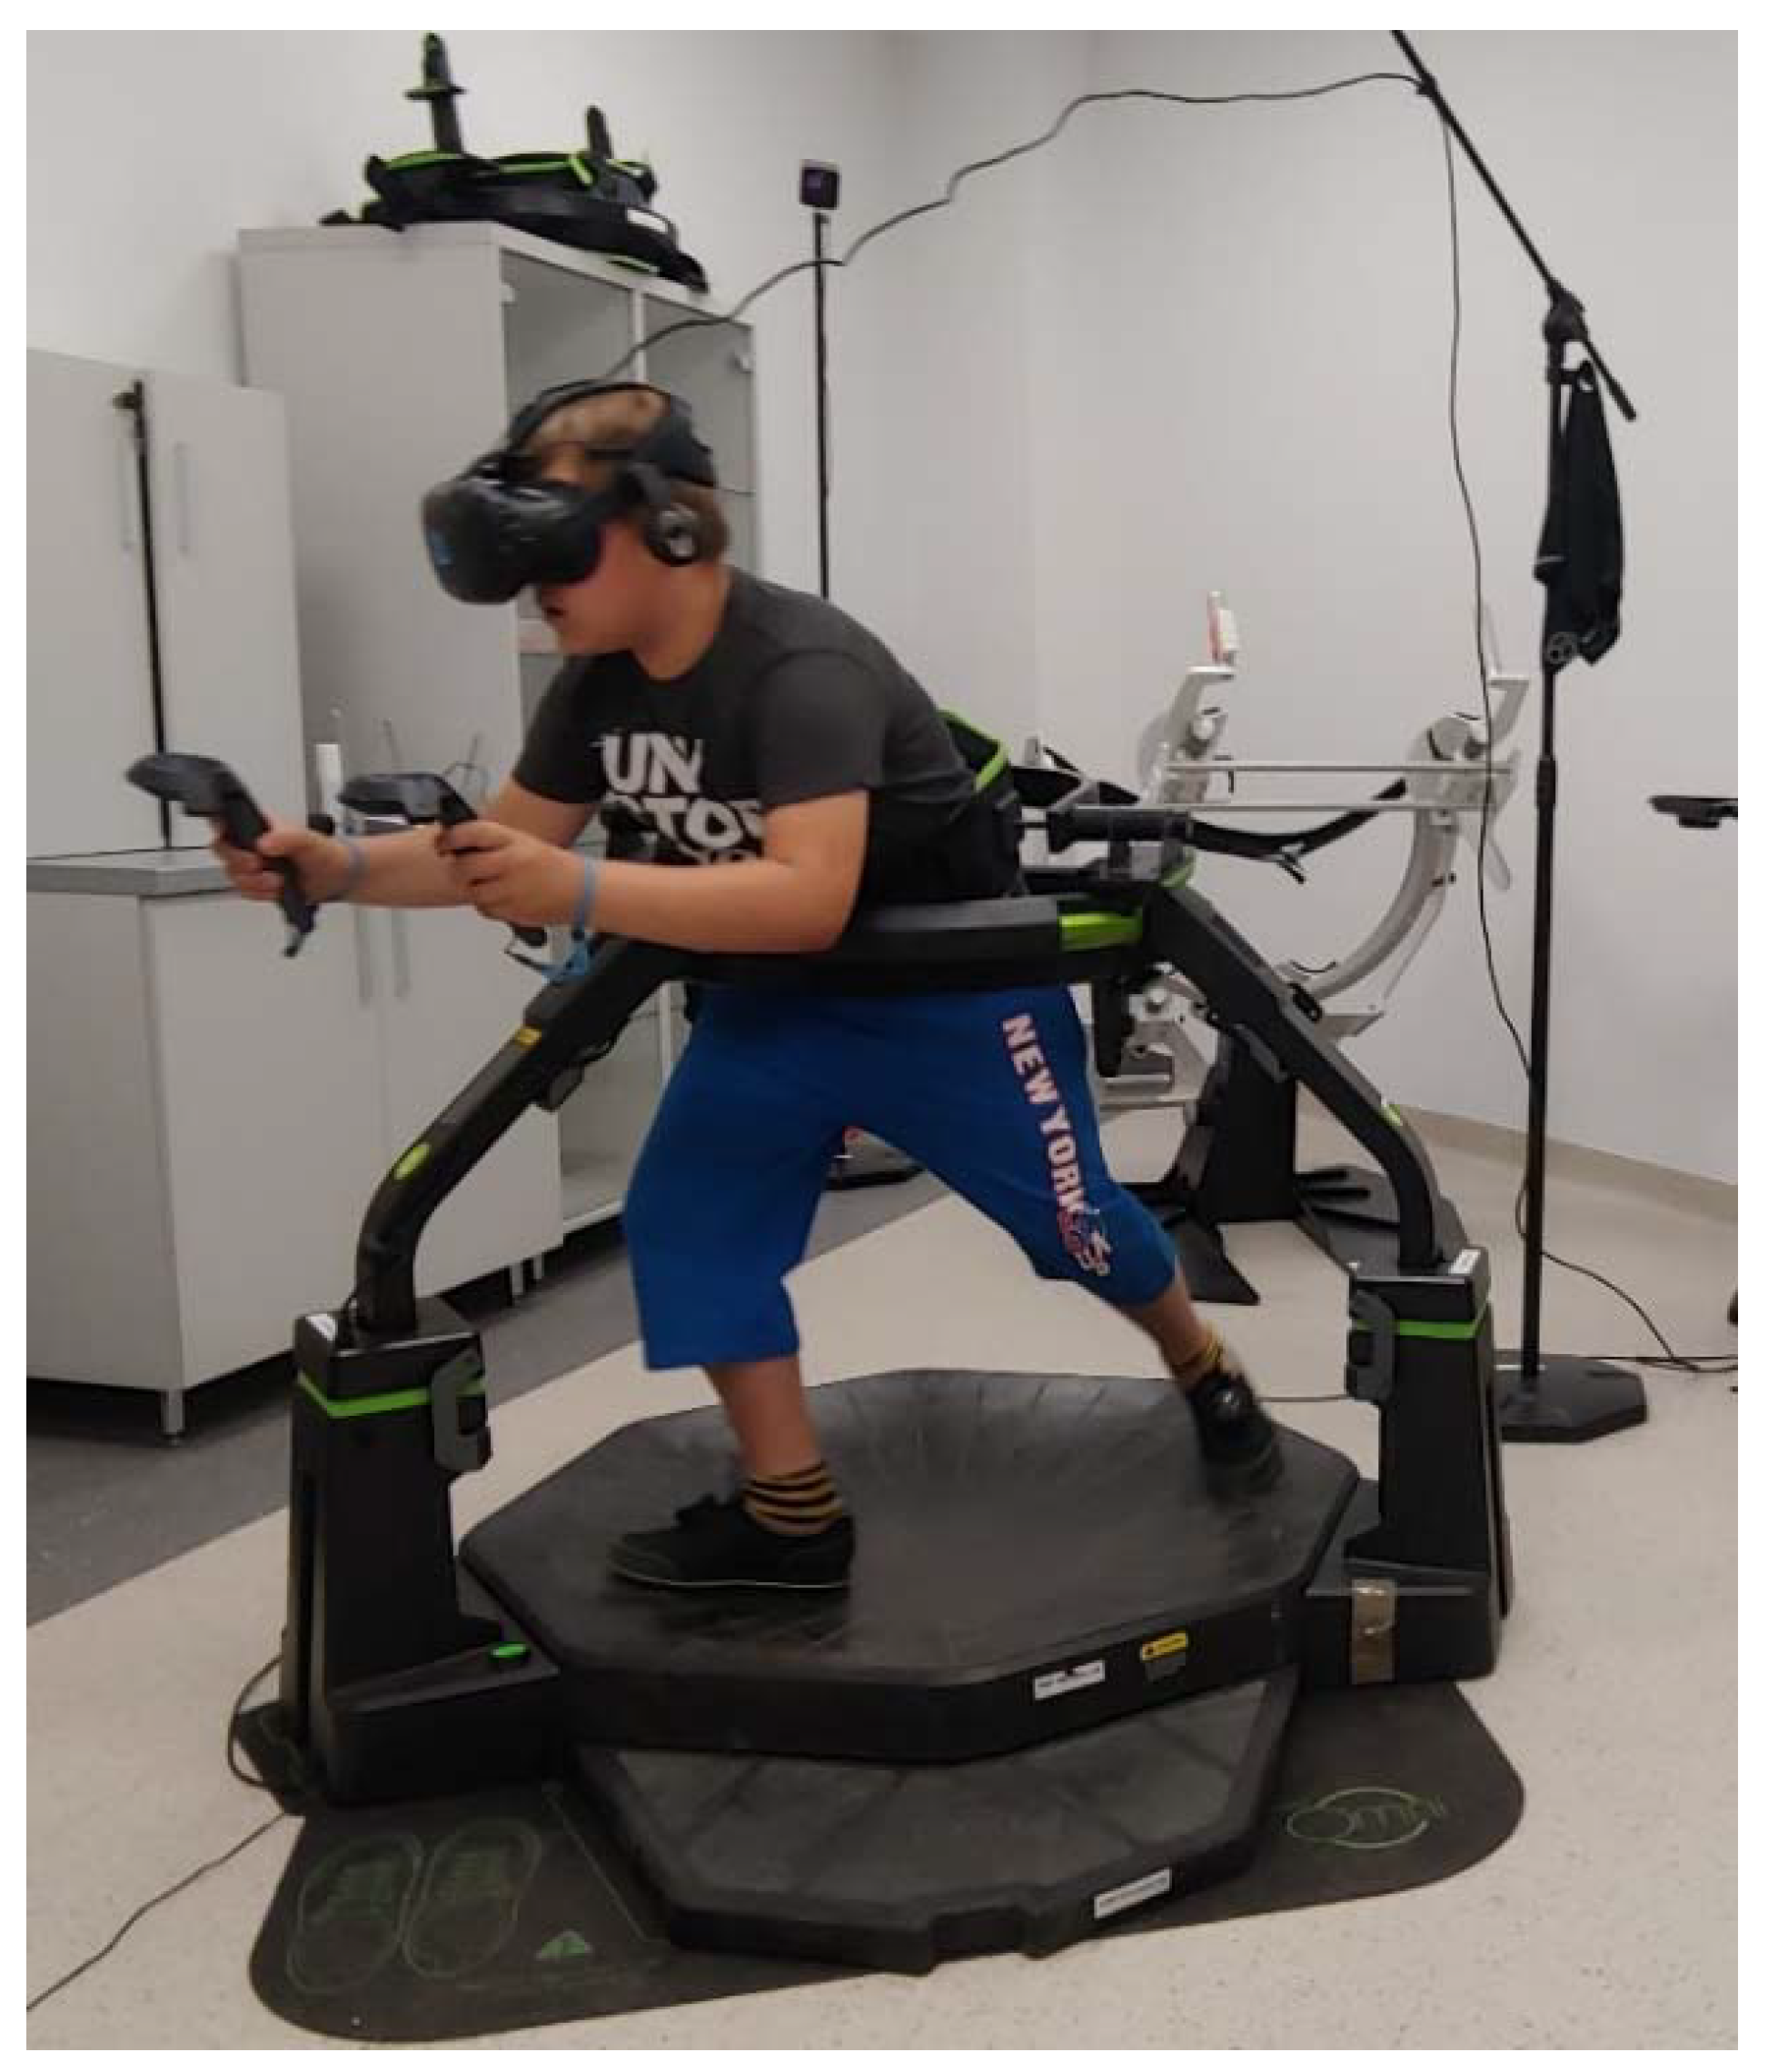 IJERPH | Free Full-Text | Can Physical Activity in Immersive Virtual Reality  Be Attractive and Have Sufficient Intensity to Meet Health Recommendations  for Obese Children? A Pilot Study